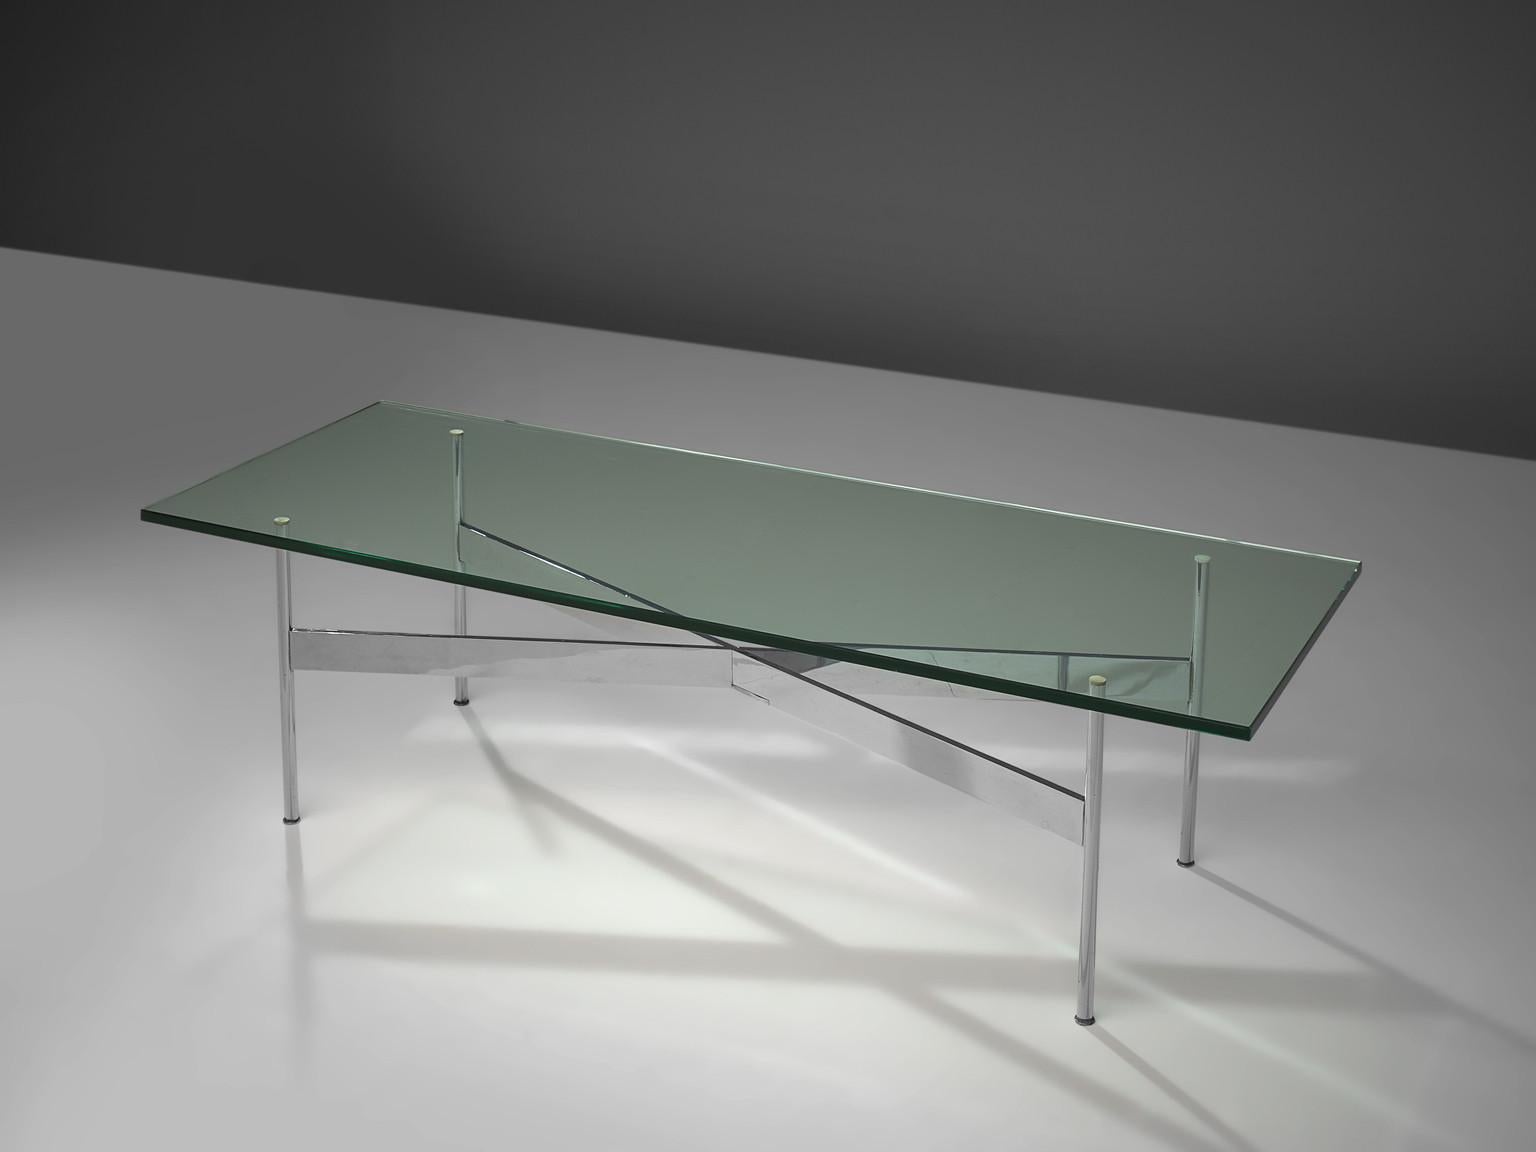 Katavolos, Kelley and Littell for Laverne, coffee table, chrome-plated steel, glass, United States, 1960s.

This elegant piece features a thick glass top and seamlessly manufactured X-style chrome-plated base. Carefully designed with stoppers to